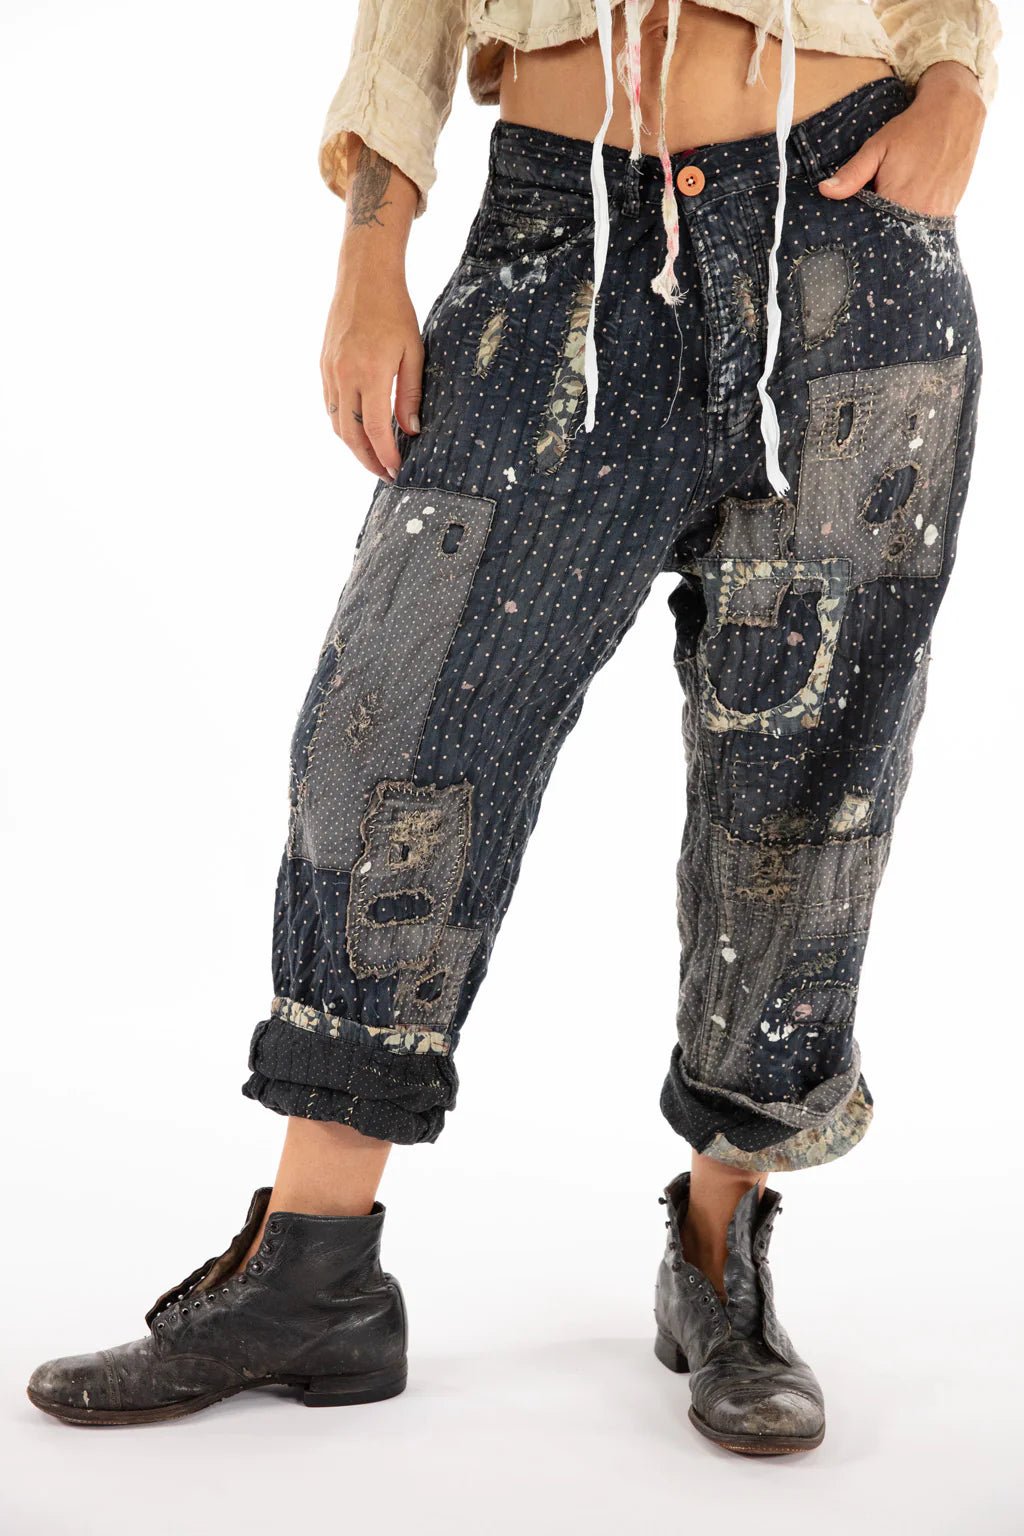 Magnolia Pearl Dot and Floral Miners Pants - Katze Boutique